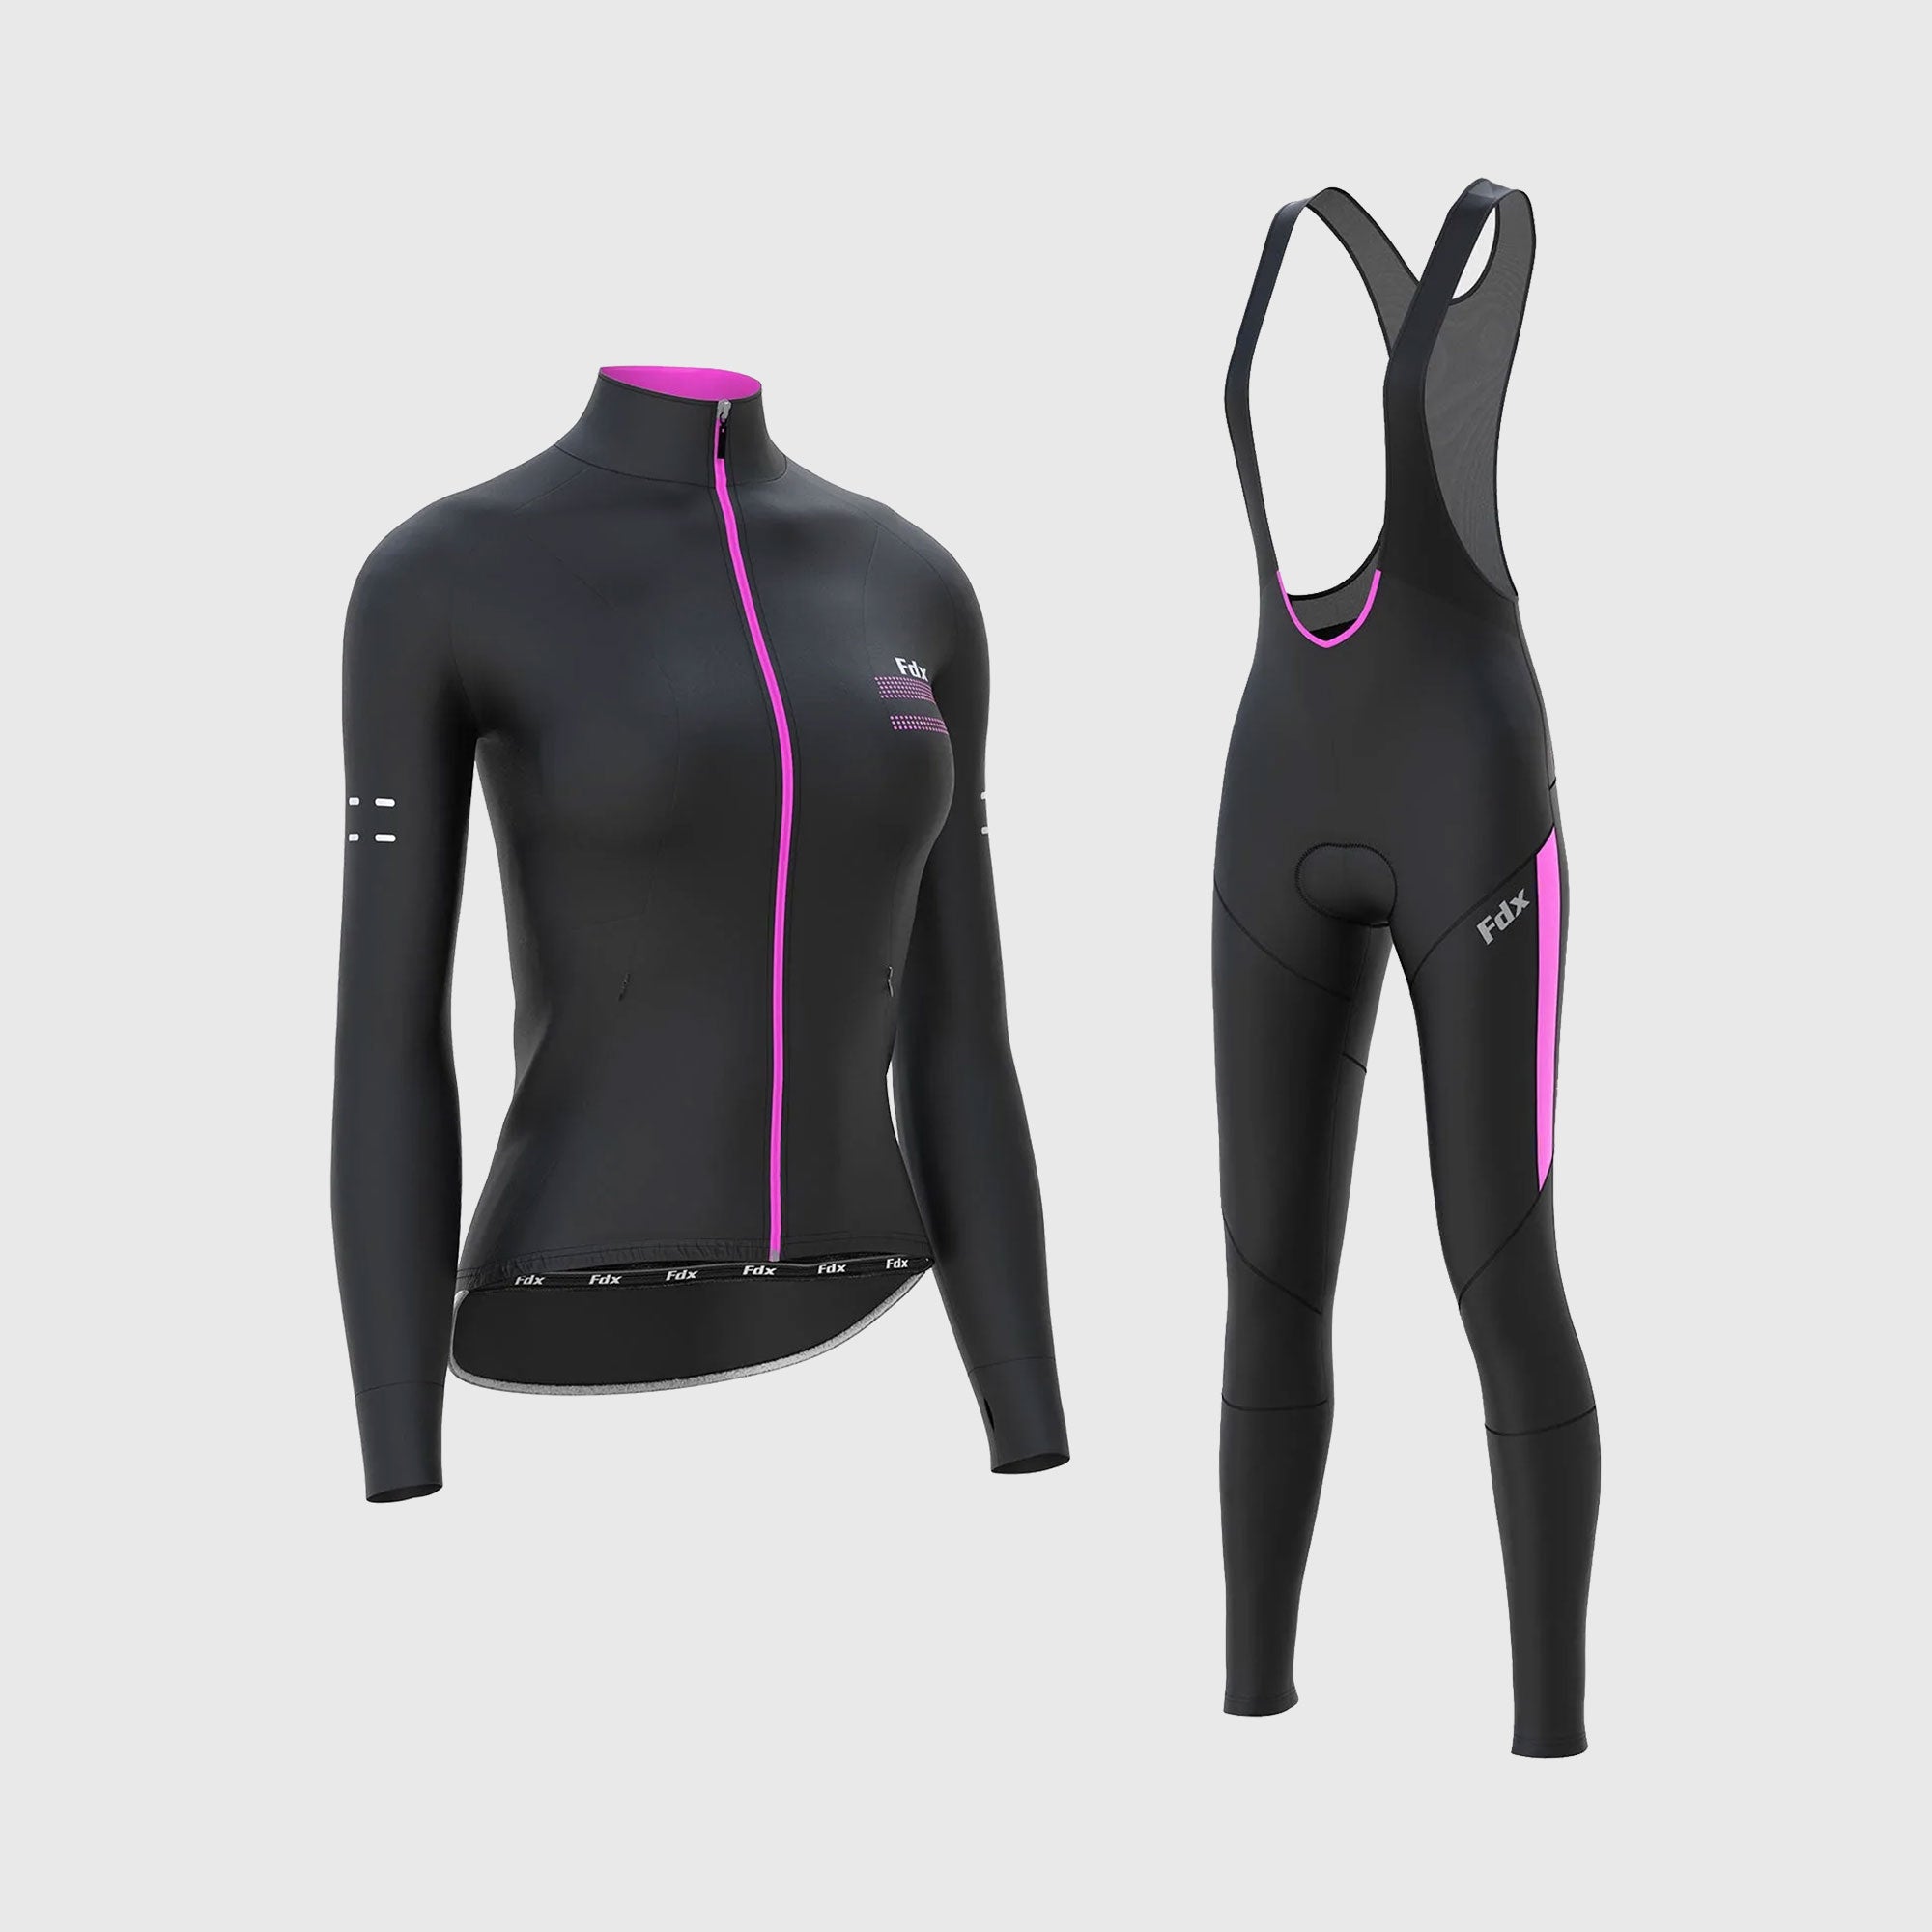 Buy Fdx Women's Set Long Sleeve Compression Cycling Tops